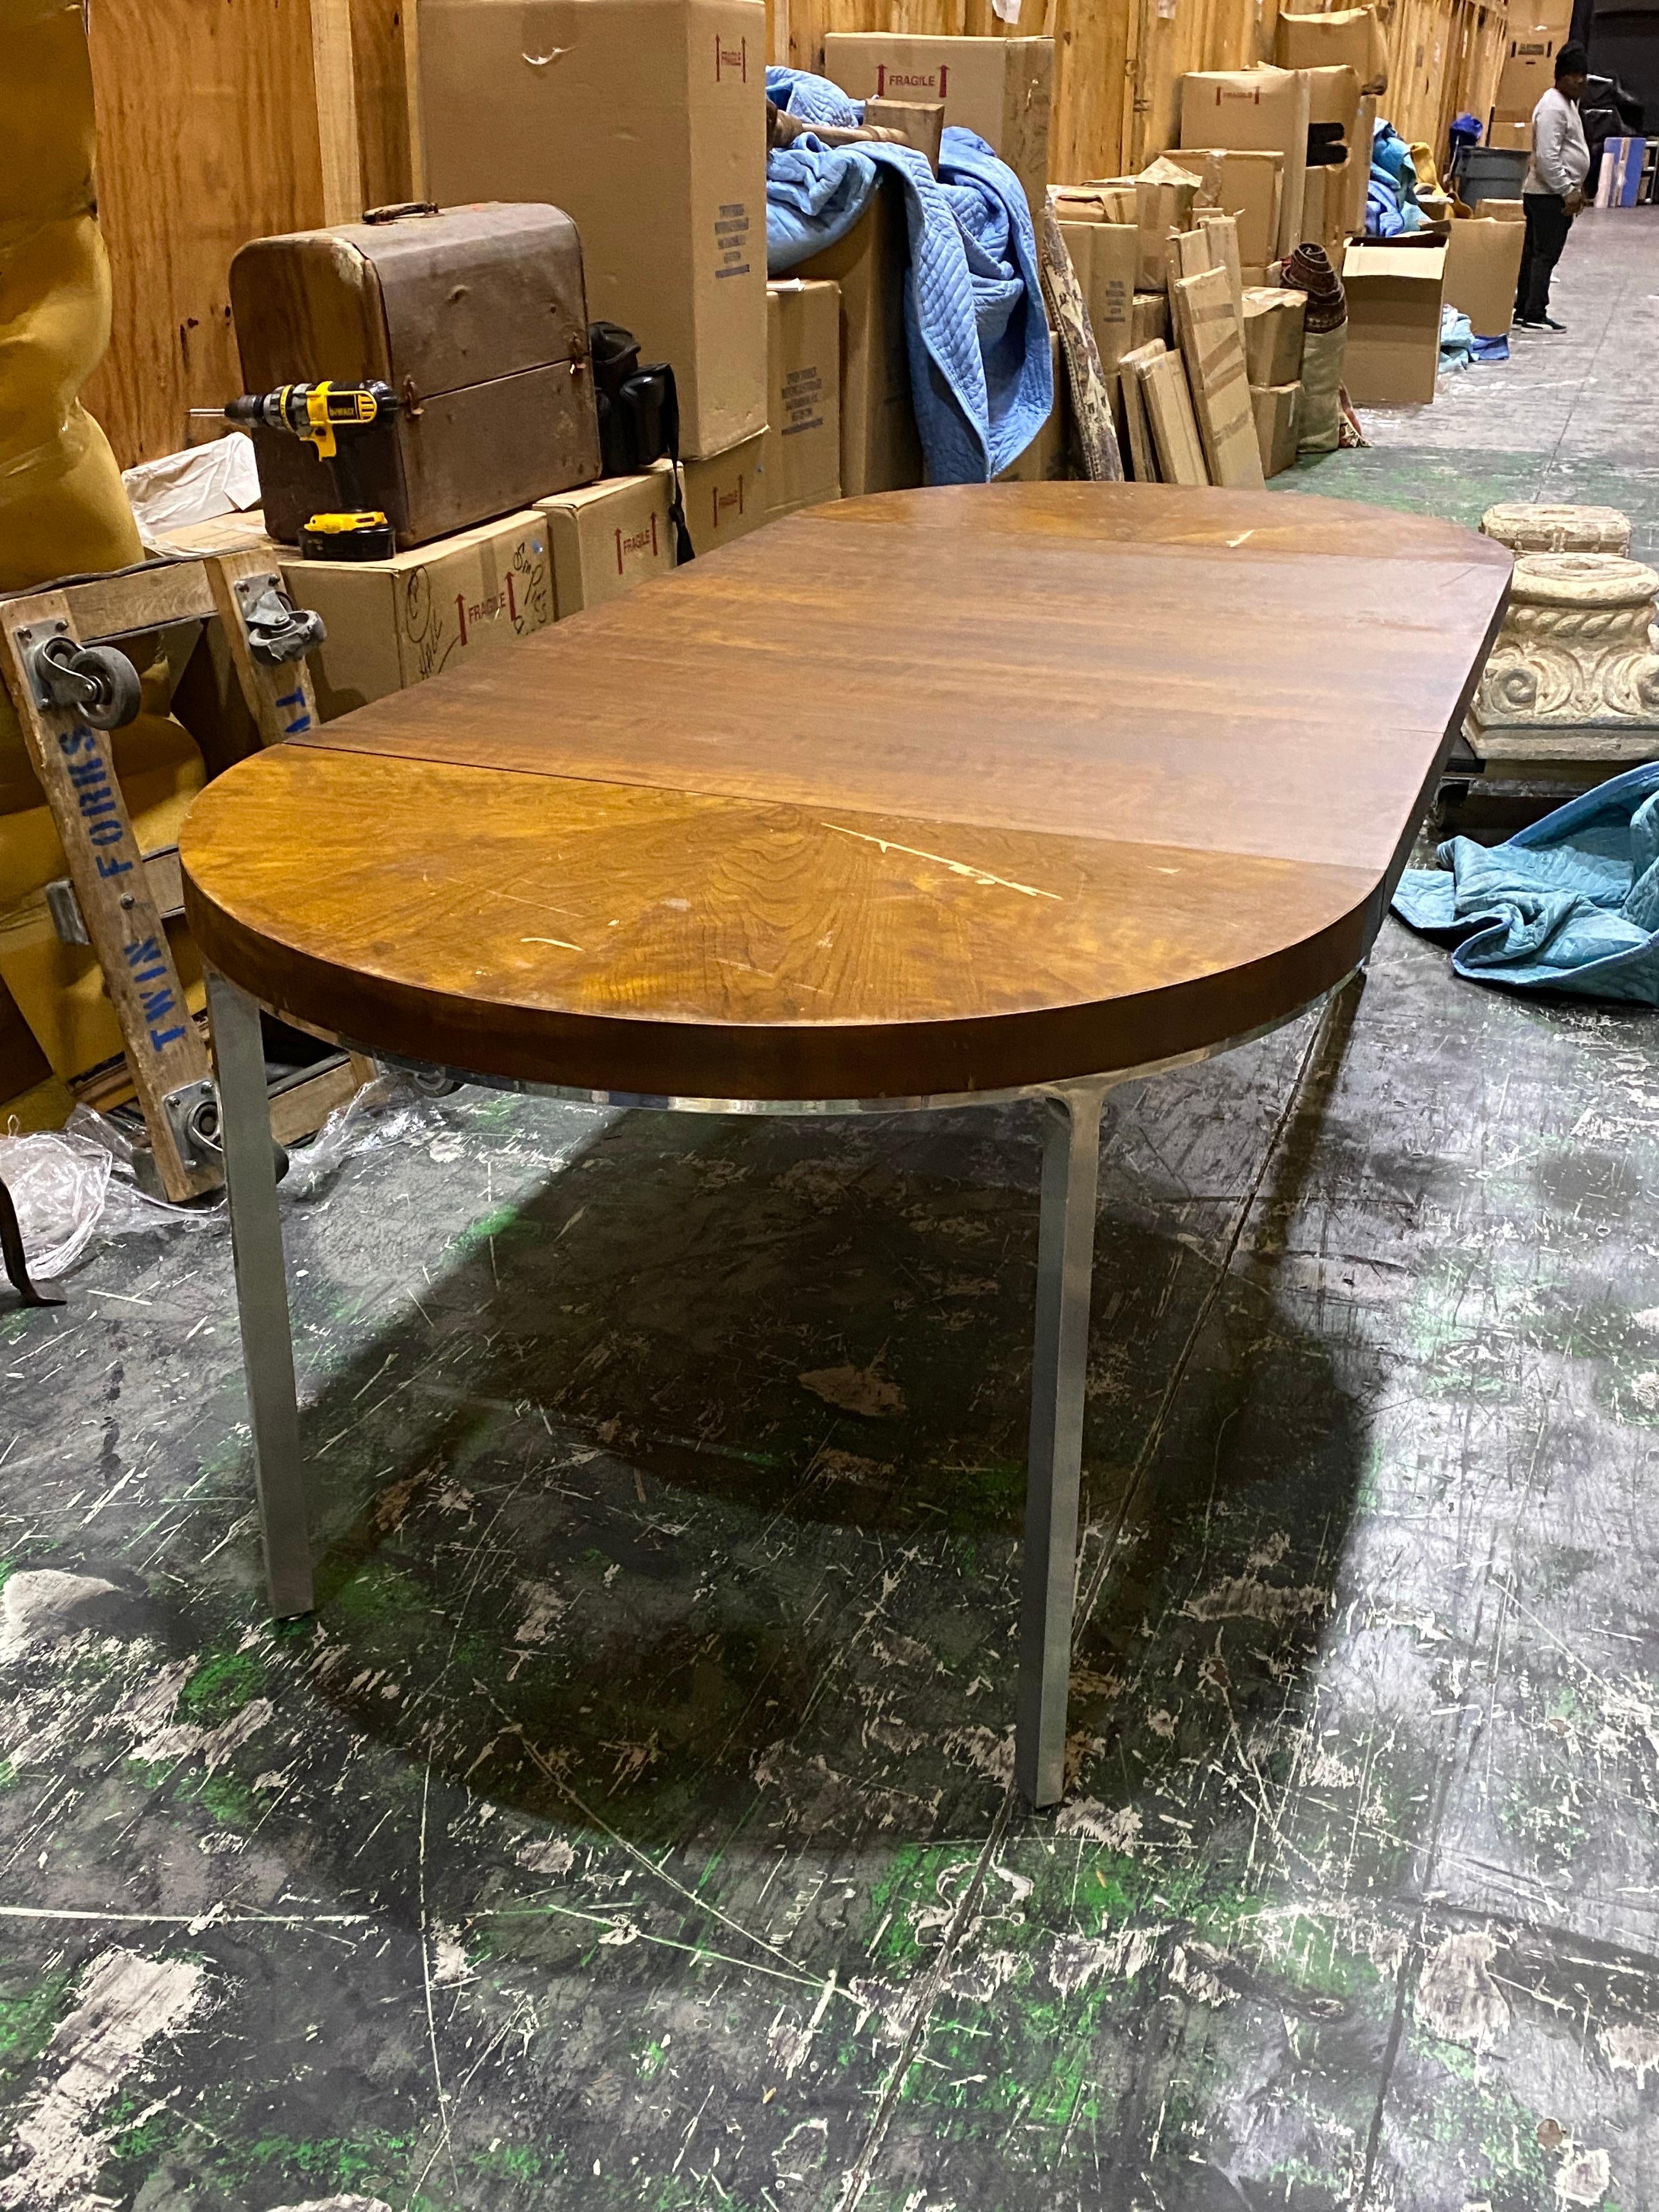 20th Century Modern Stainless Steel & Walnut Book-Matched Wood Round Extension Dining Table For Sale